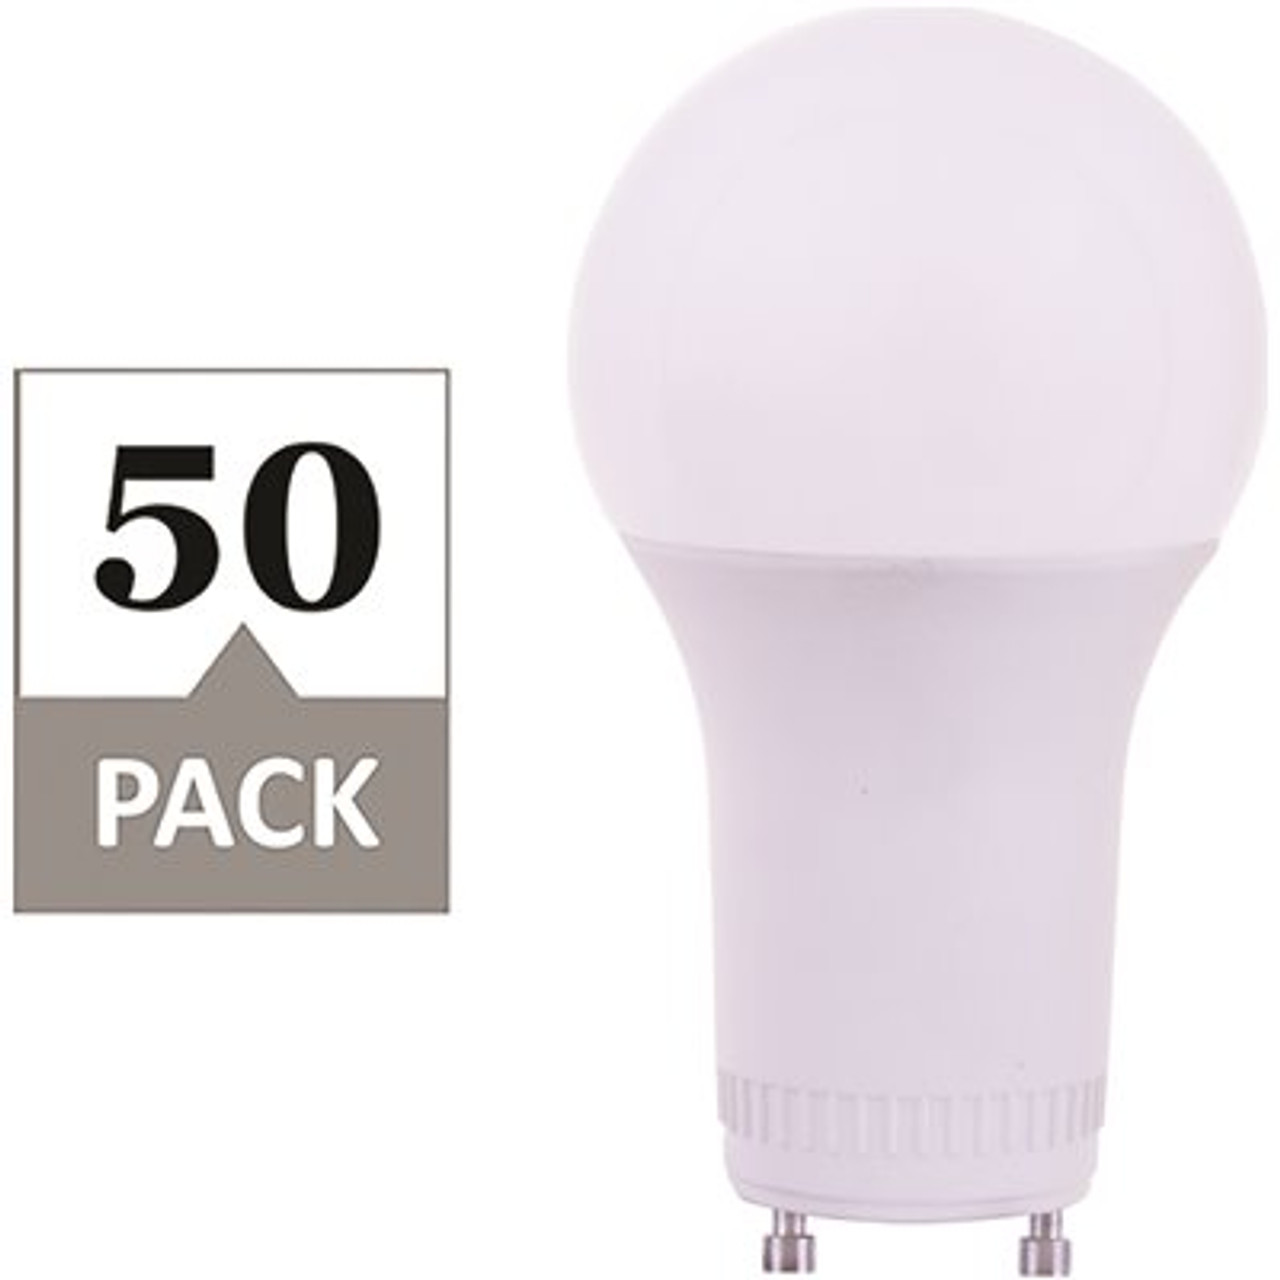 100-Watt Equivalent A21 Dimmable with GU24 Base CA CEC JA8 Compliant LED Light Bulb Cool White 4000K (50-Pack)